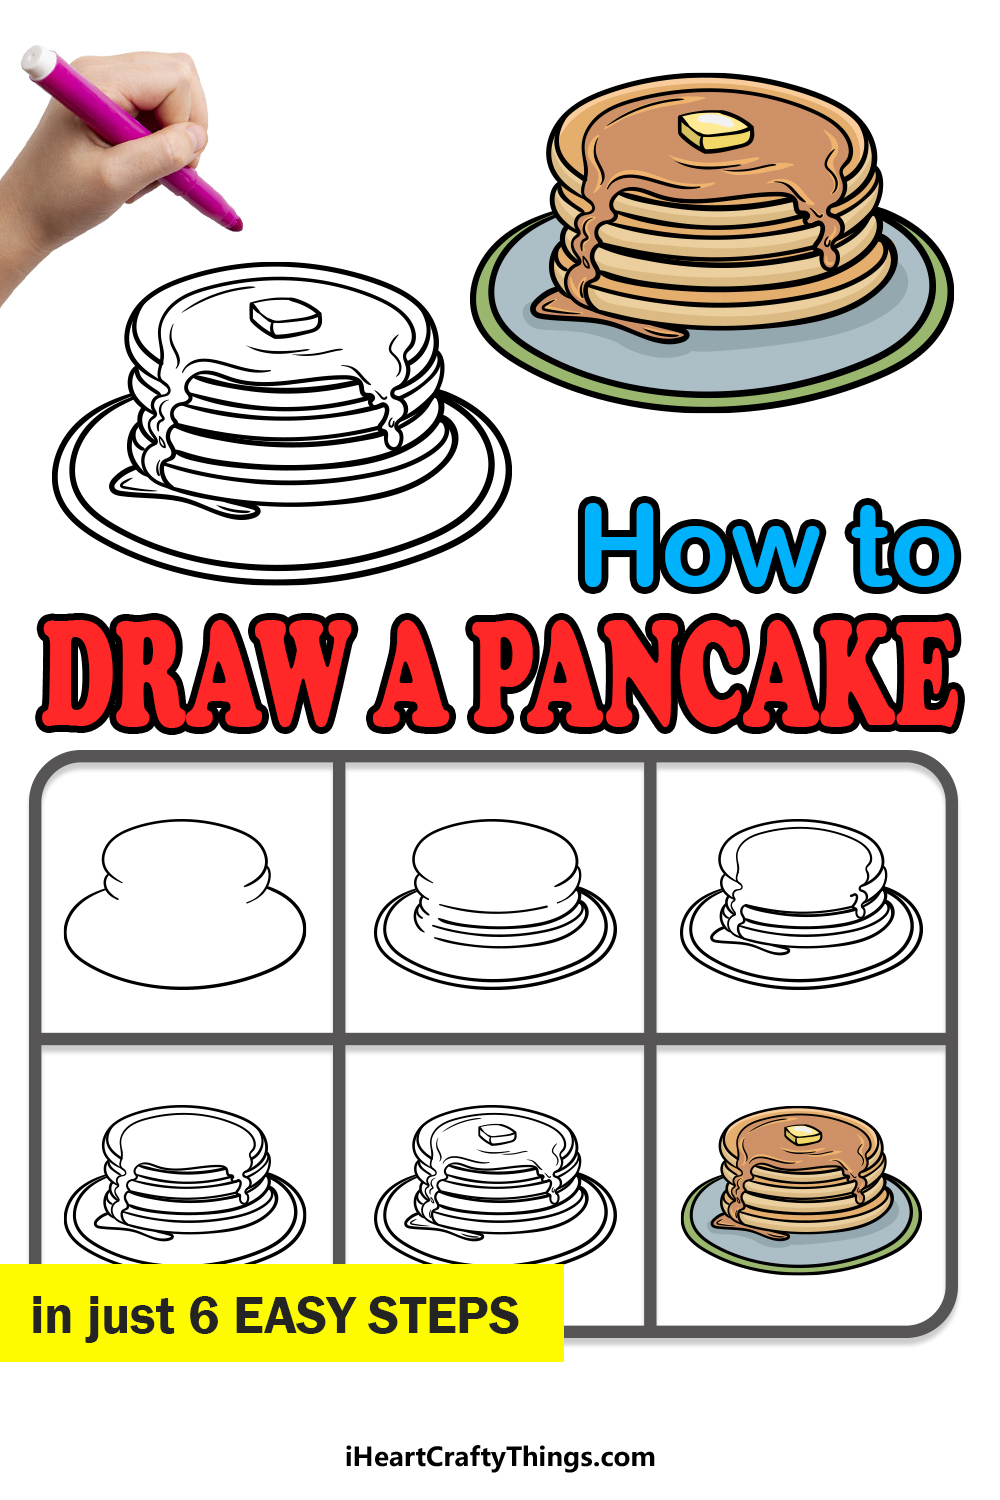 how to draw a pancake in 6 easy steps